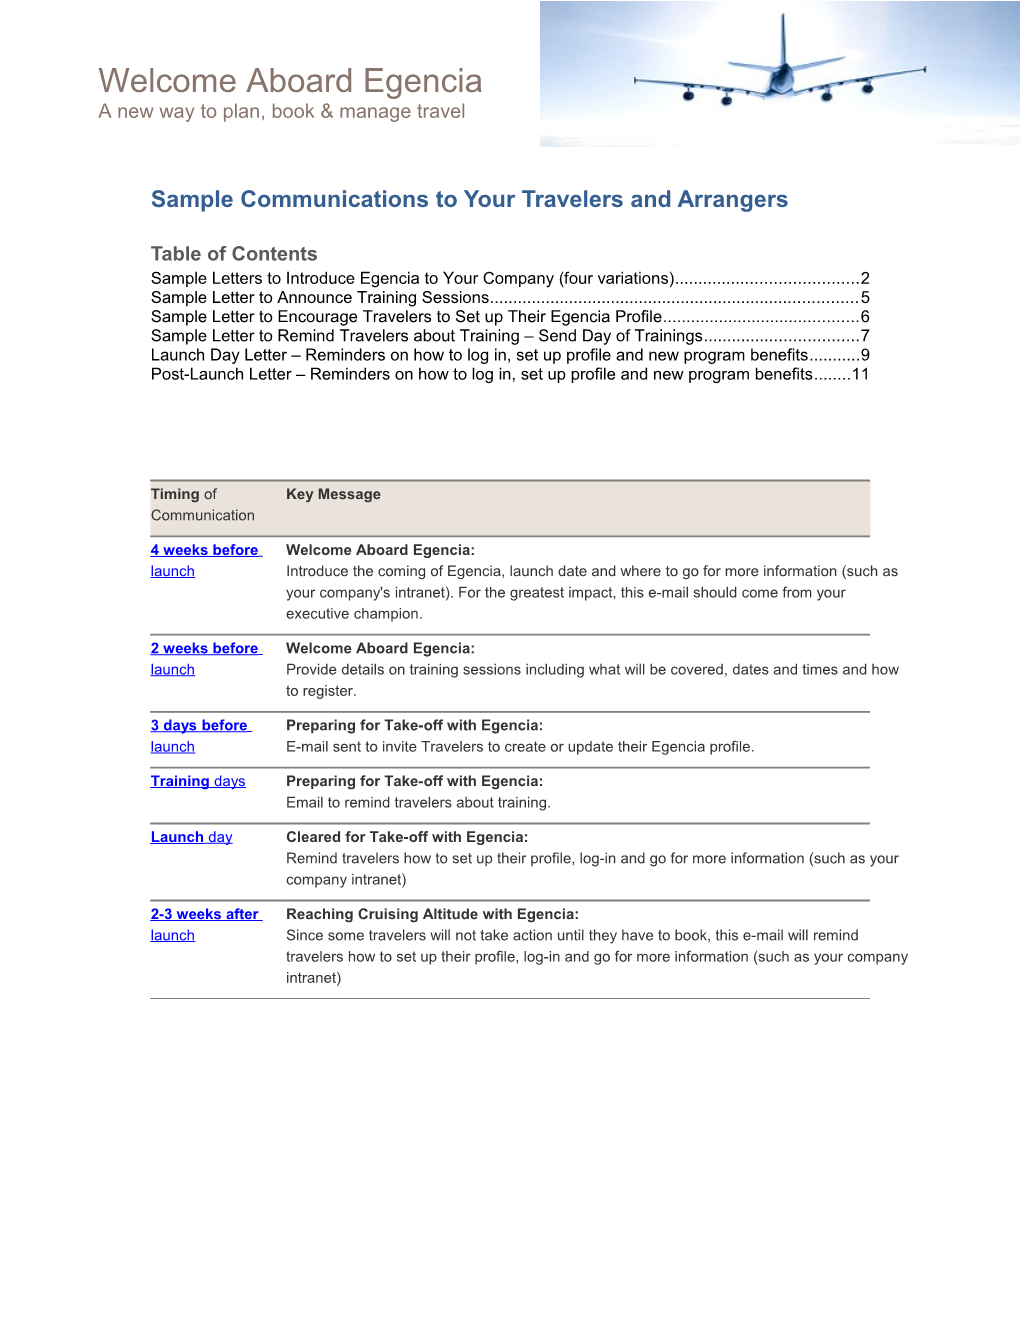 Example Letter Of Executive Communication To Travelers